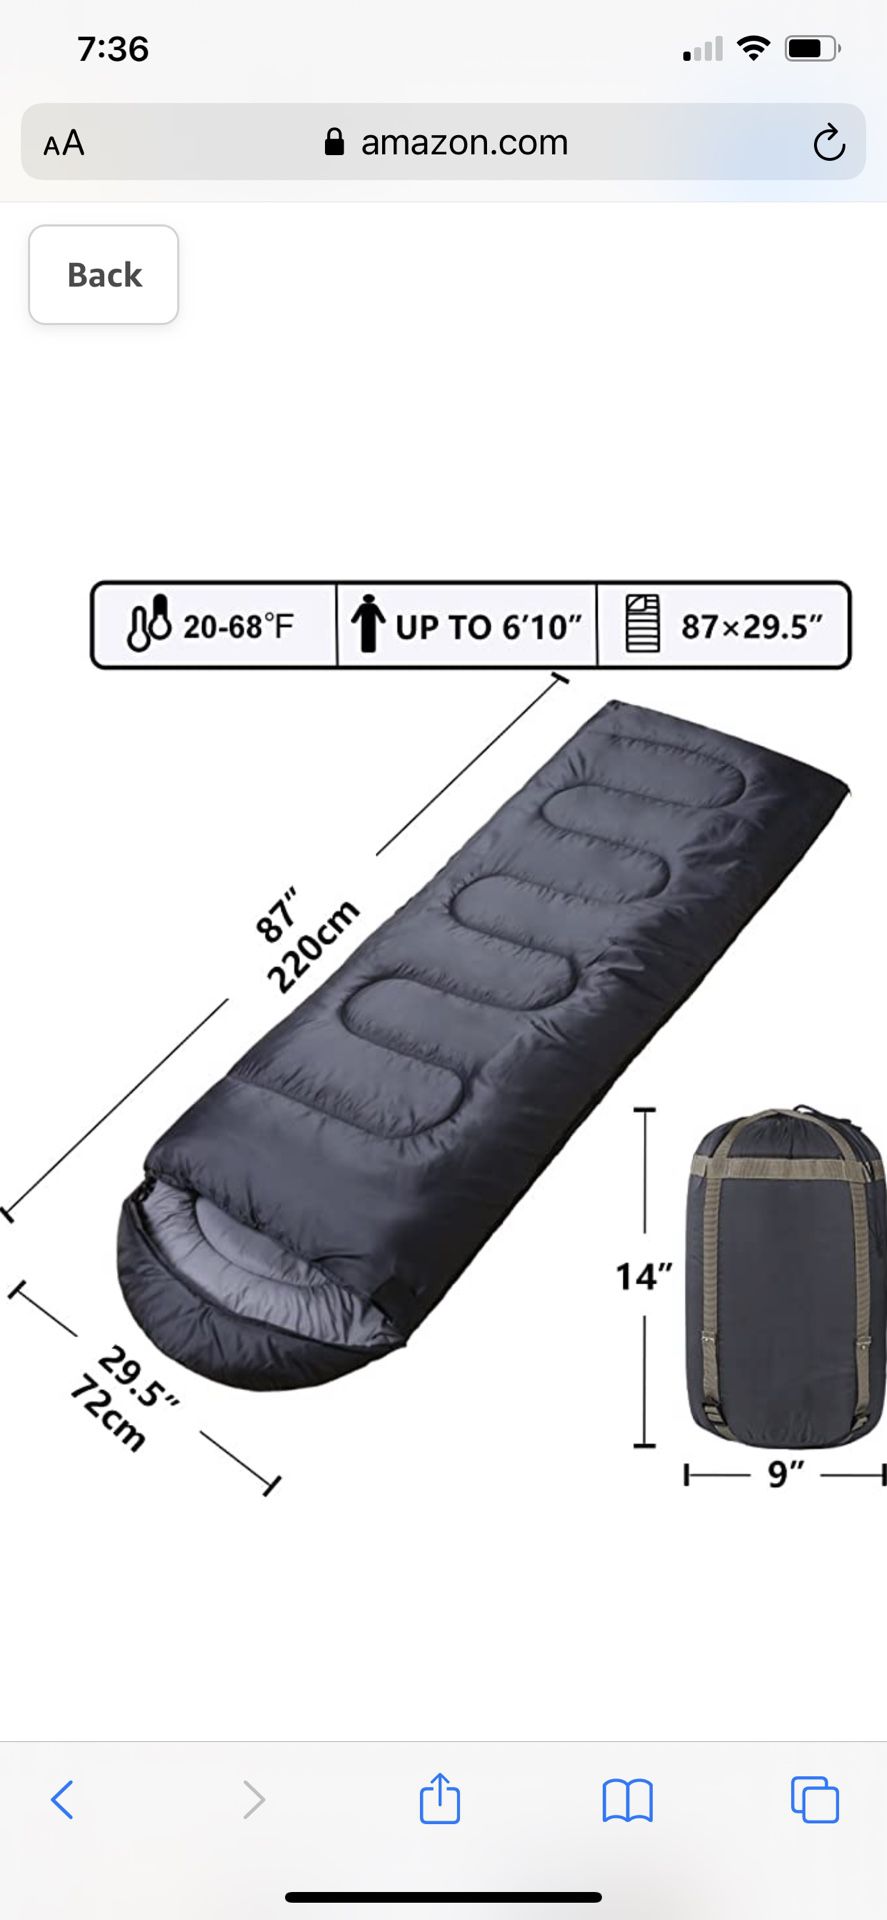 Envelope Camping Sleeping Bag for Adults, Youth，Kids & Boys, Great for 4 Season,Portable for Backpacking Traveling Hiking Waterproof Lightweight Outdo